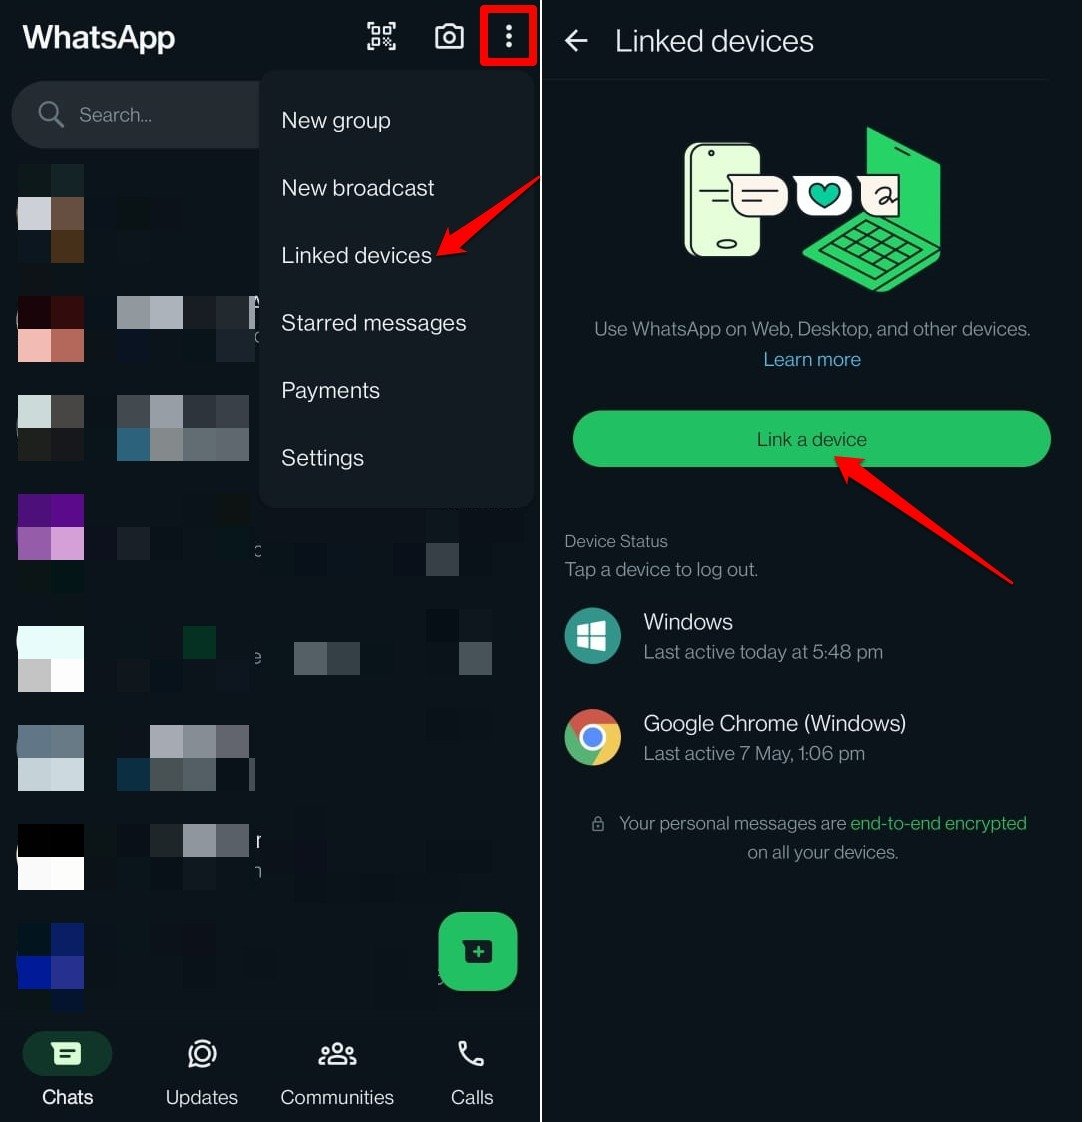 link your PC to use WhatsApp on desktop client